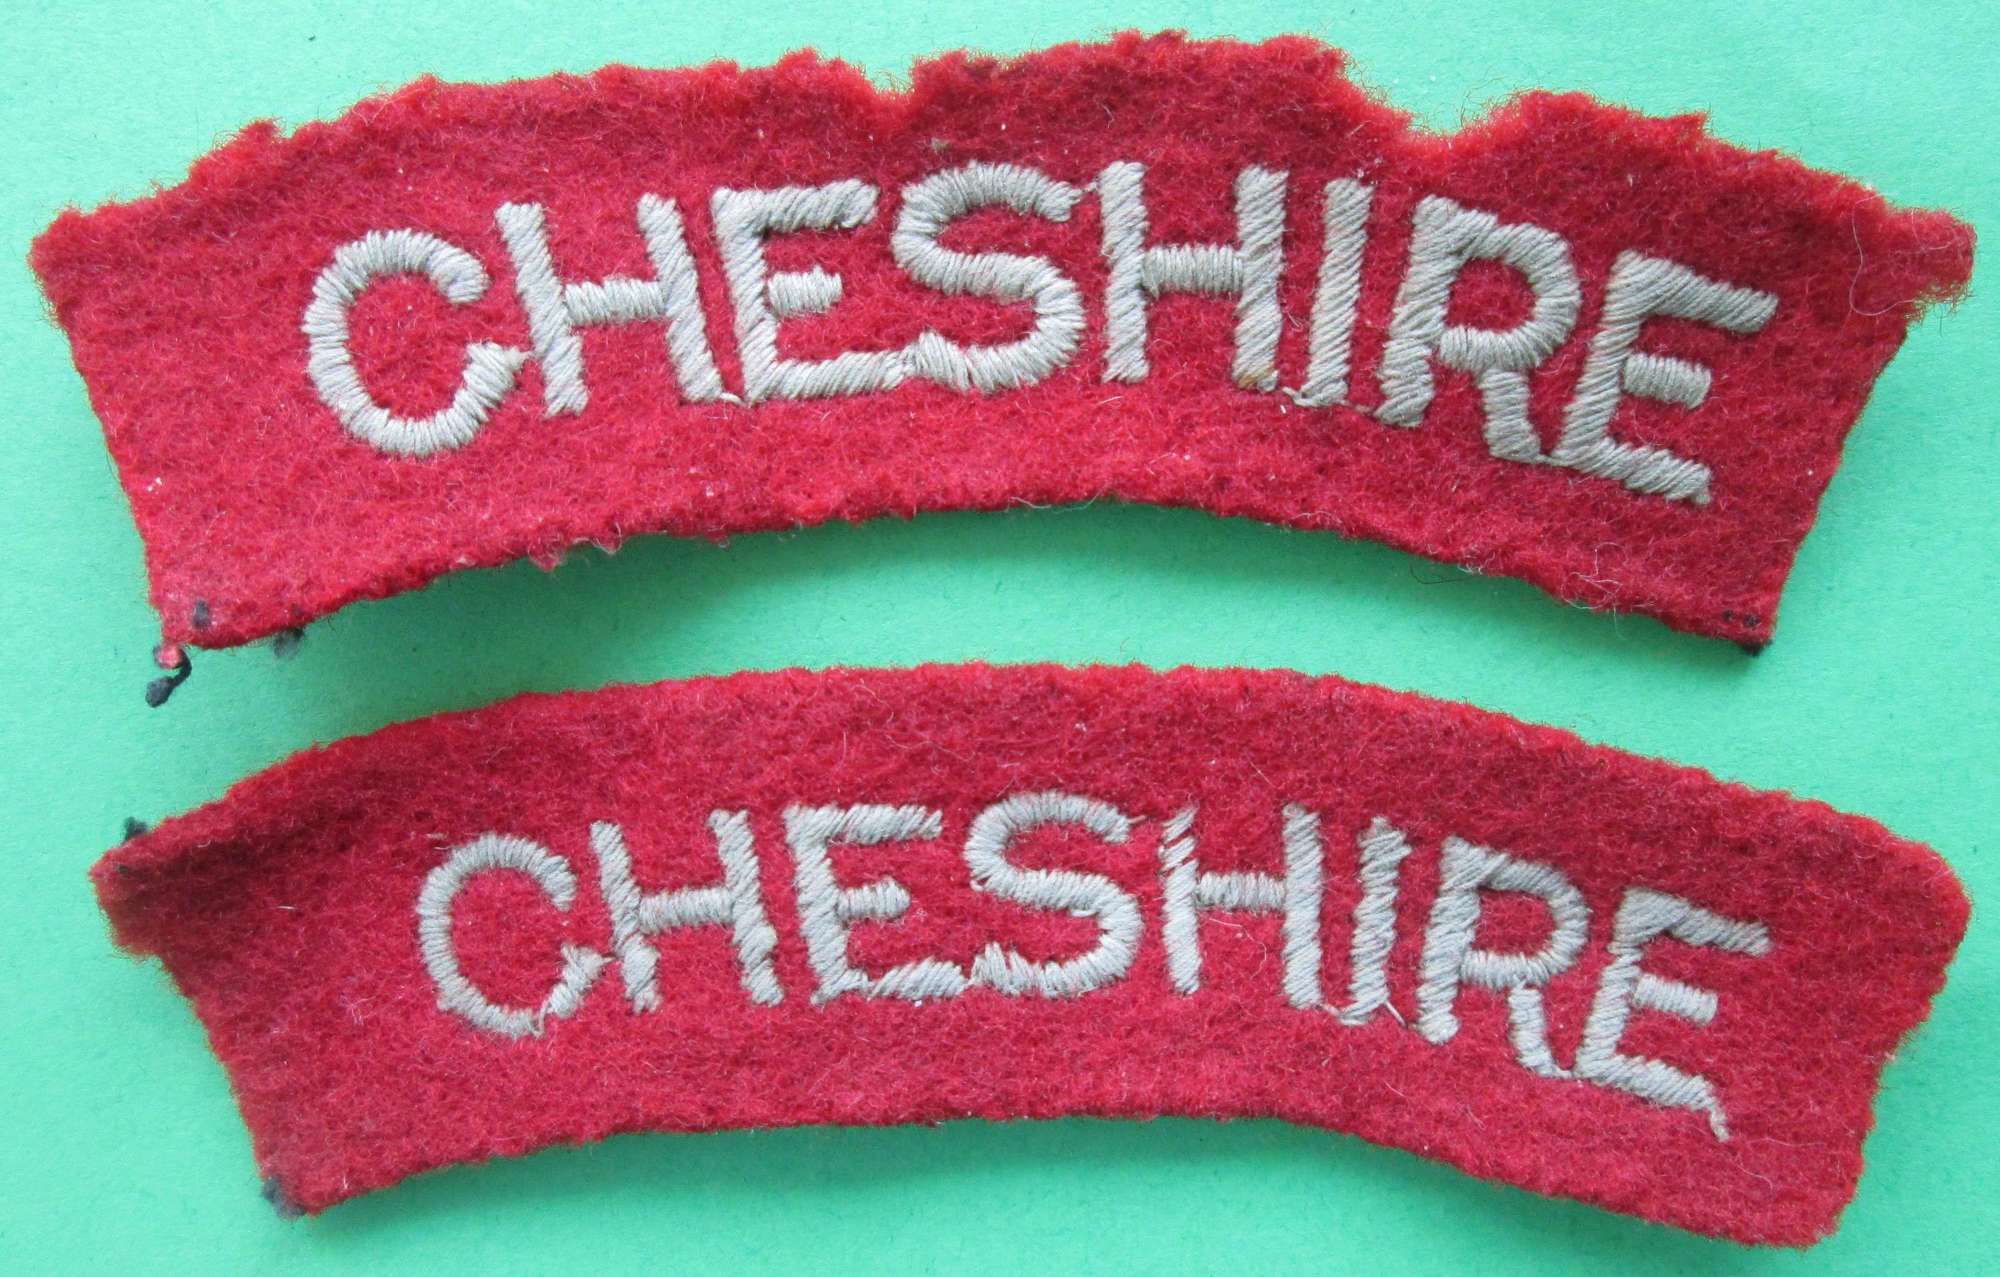 A PAIR OF CHESHIRE REGIMENT PASTE BACKED SHOULDER TITLES